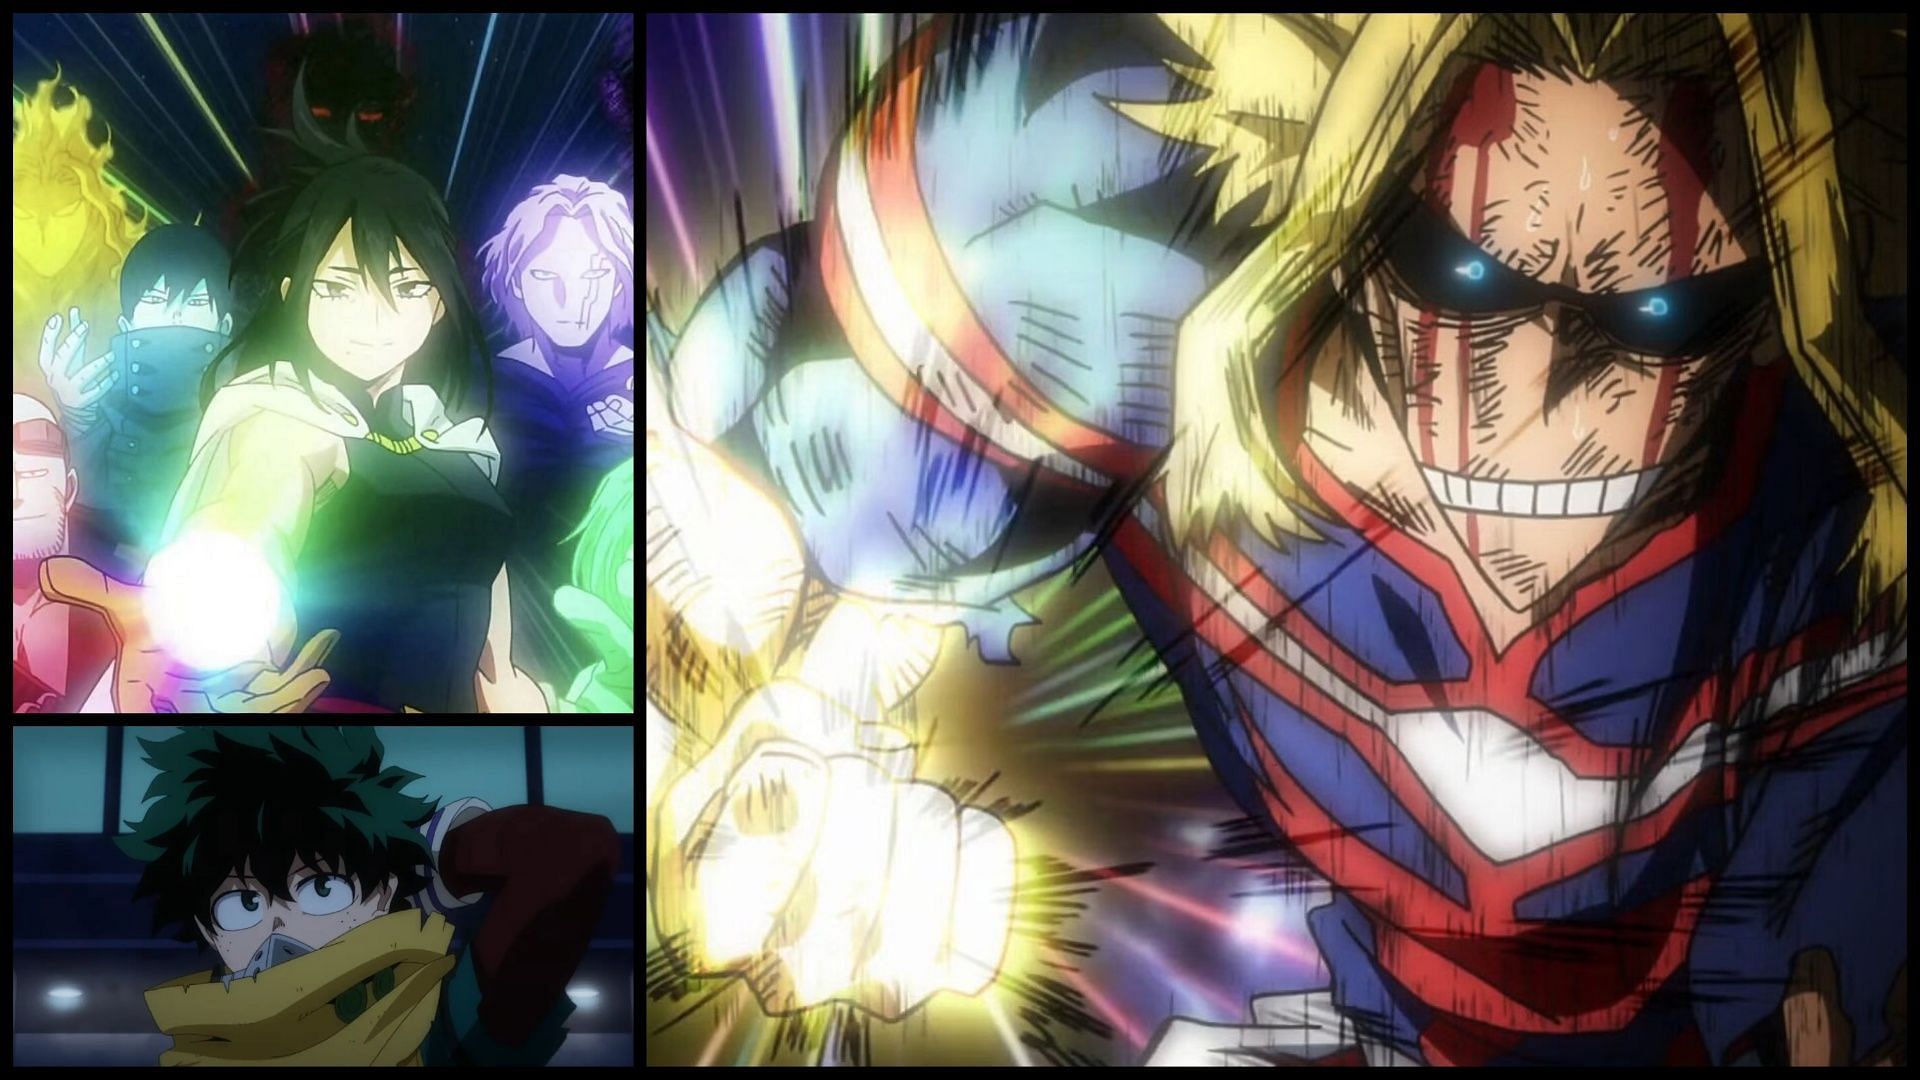 Can All Might prove to both his student and his teacher that one doesn